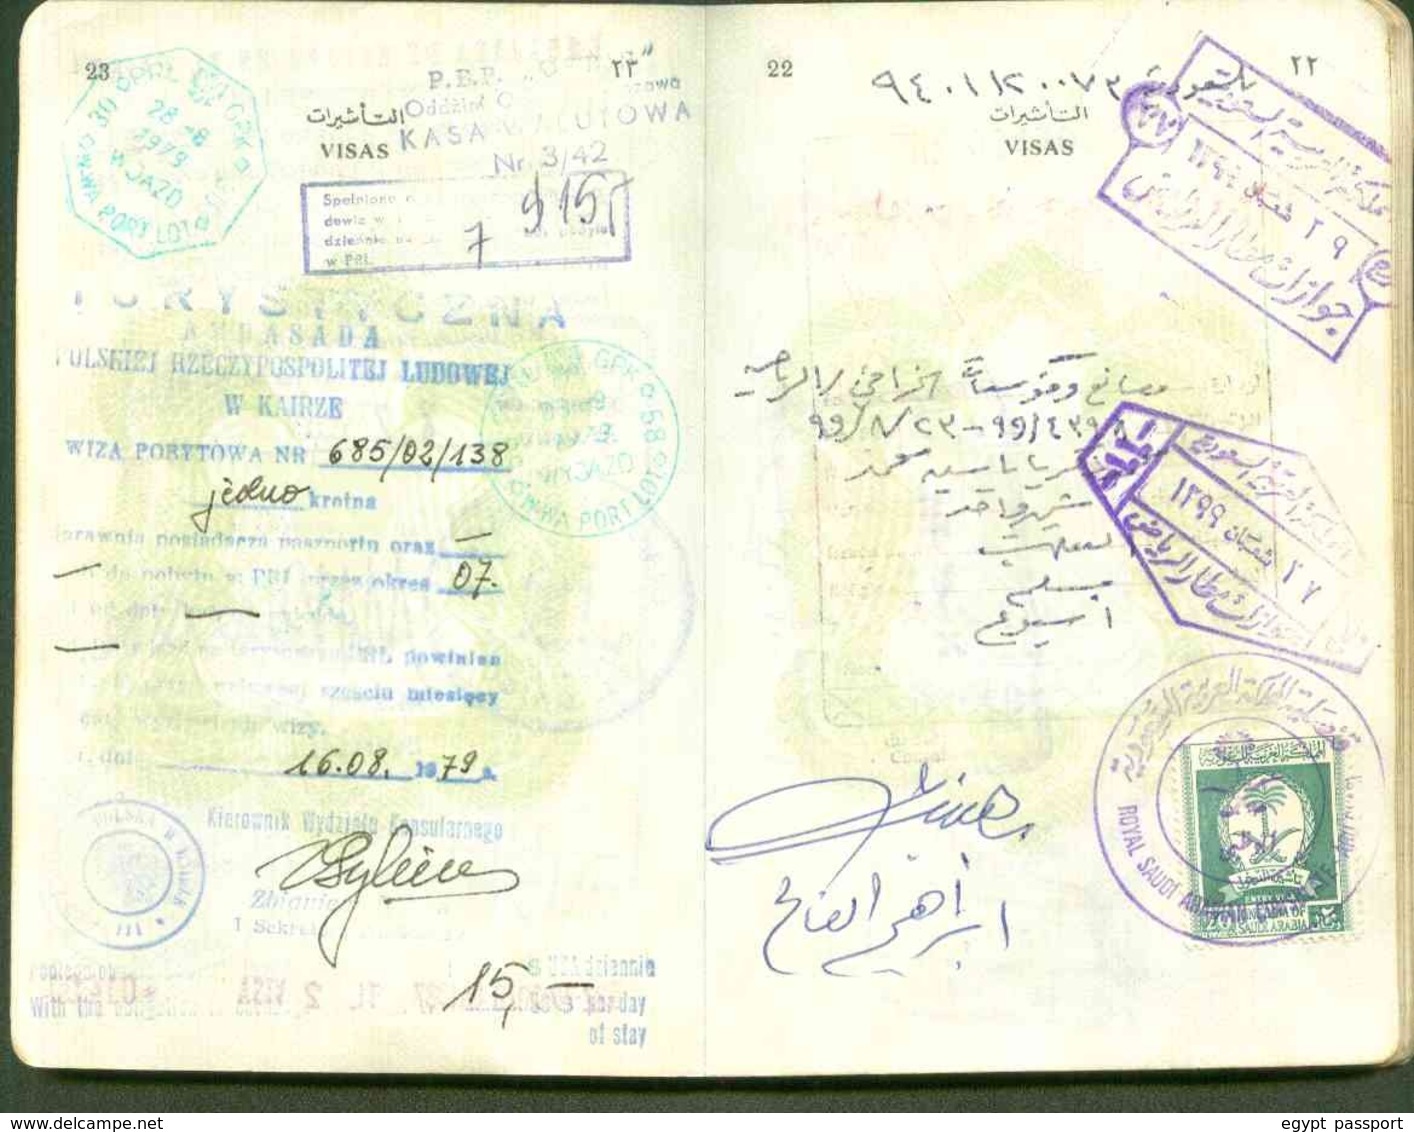 UAE , Egypt, Saudi Arabia and France revenue stamps collection on complete passport - Condition as in Scan